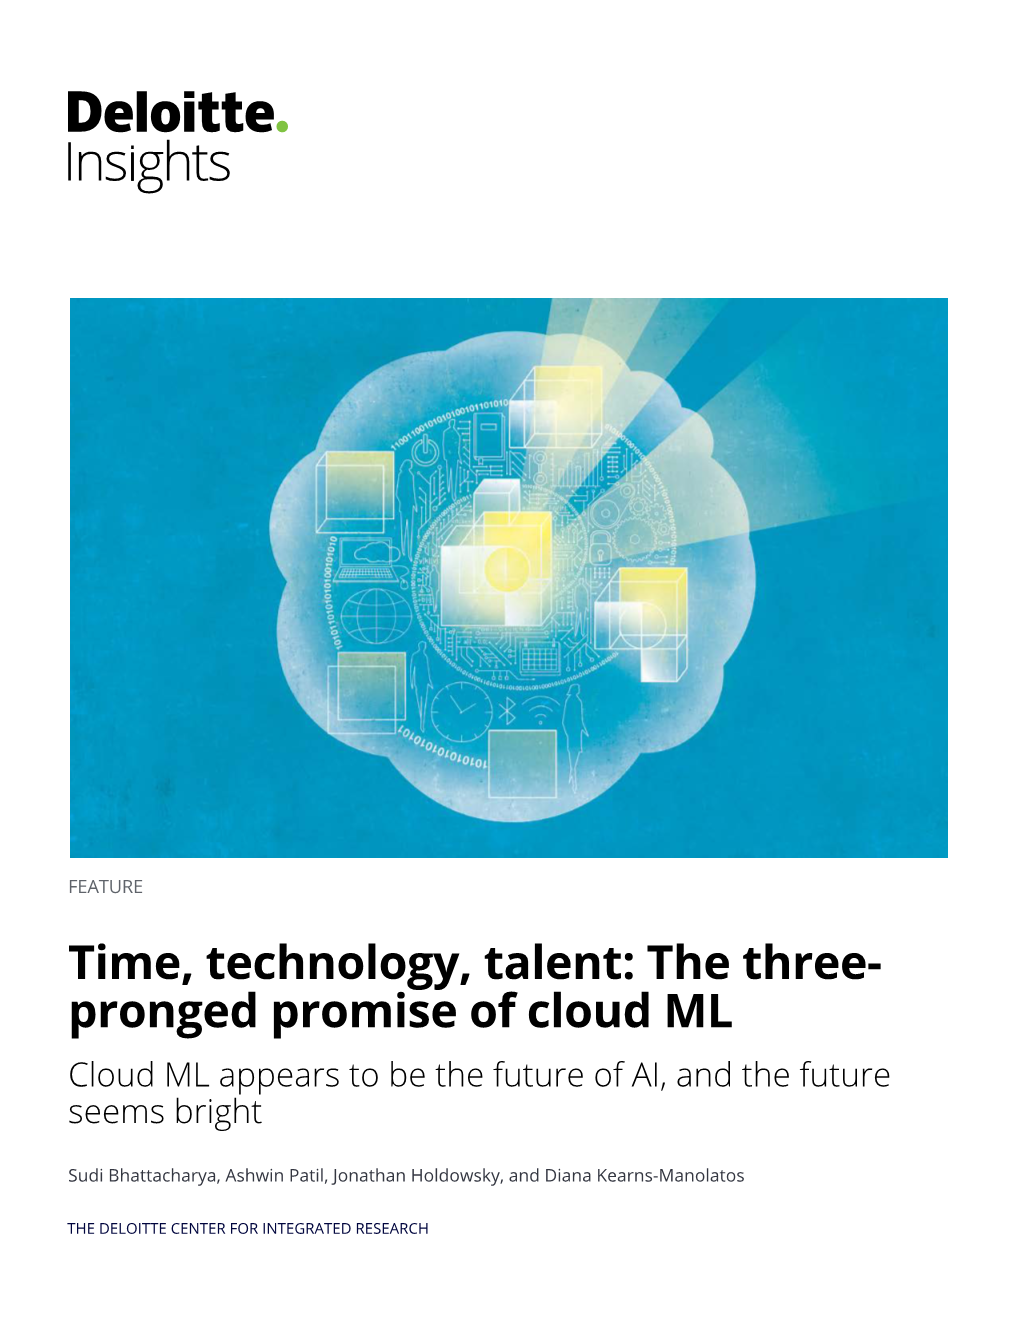 Time, Technology, Talent: the Three- Pronged Promise of Cloud ML Cloud ML Appears to Be the Future of AI, and the Future Seems Bright